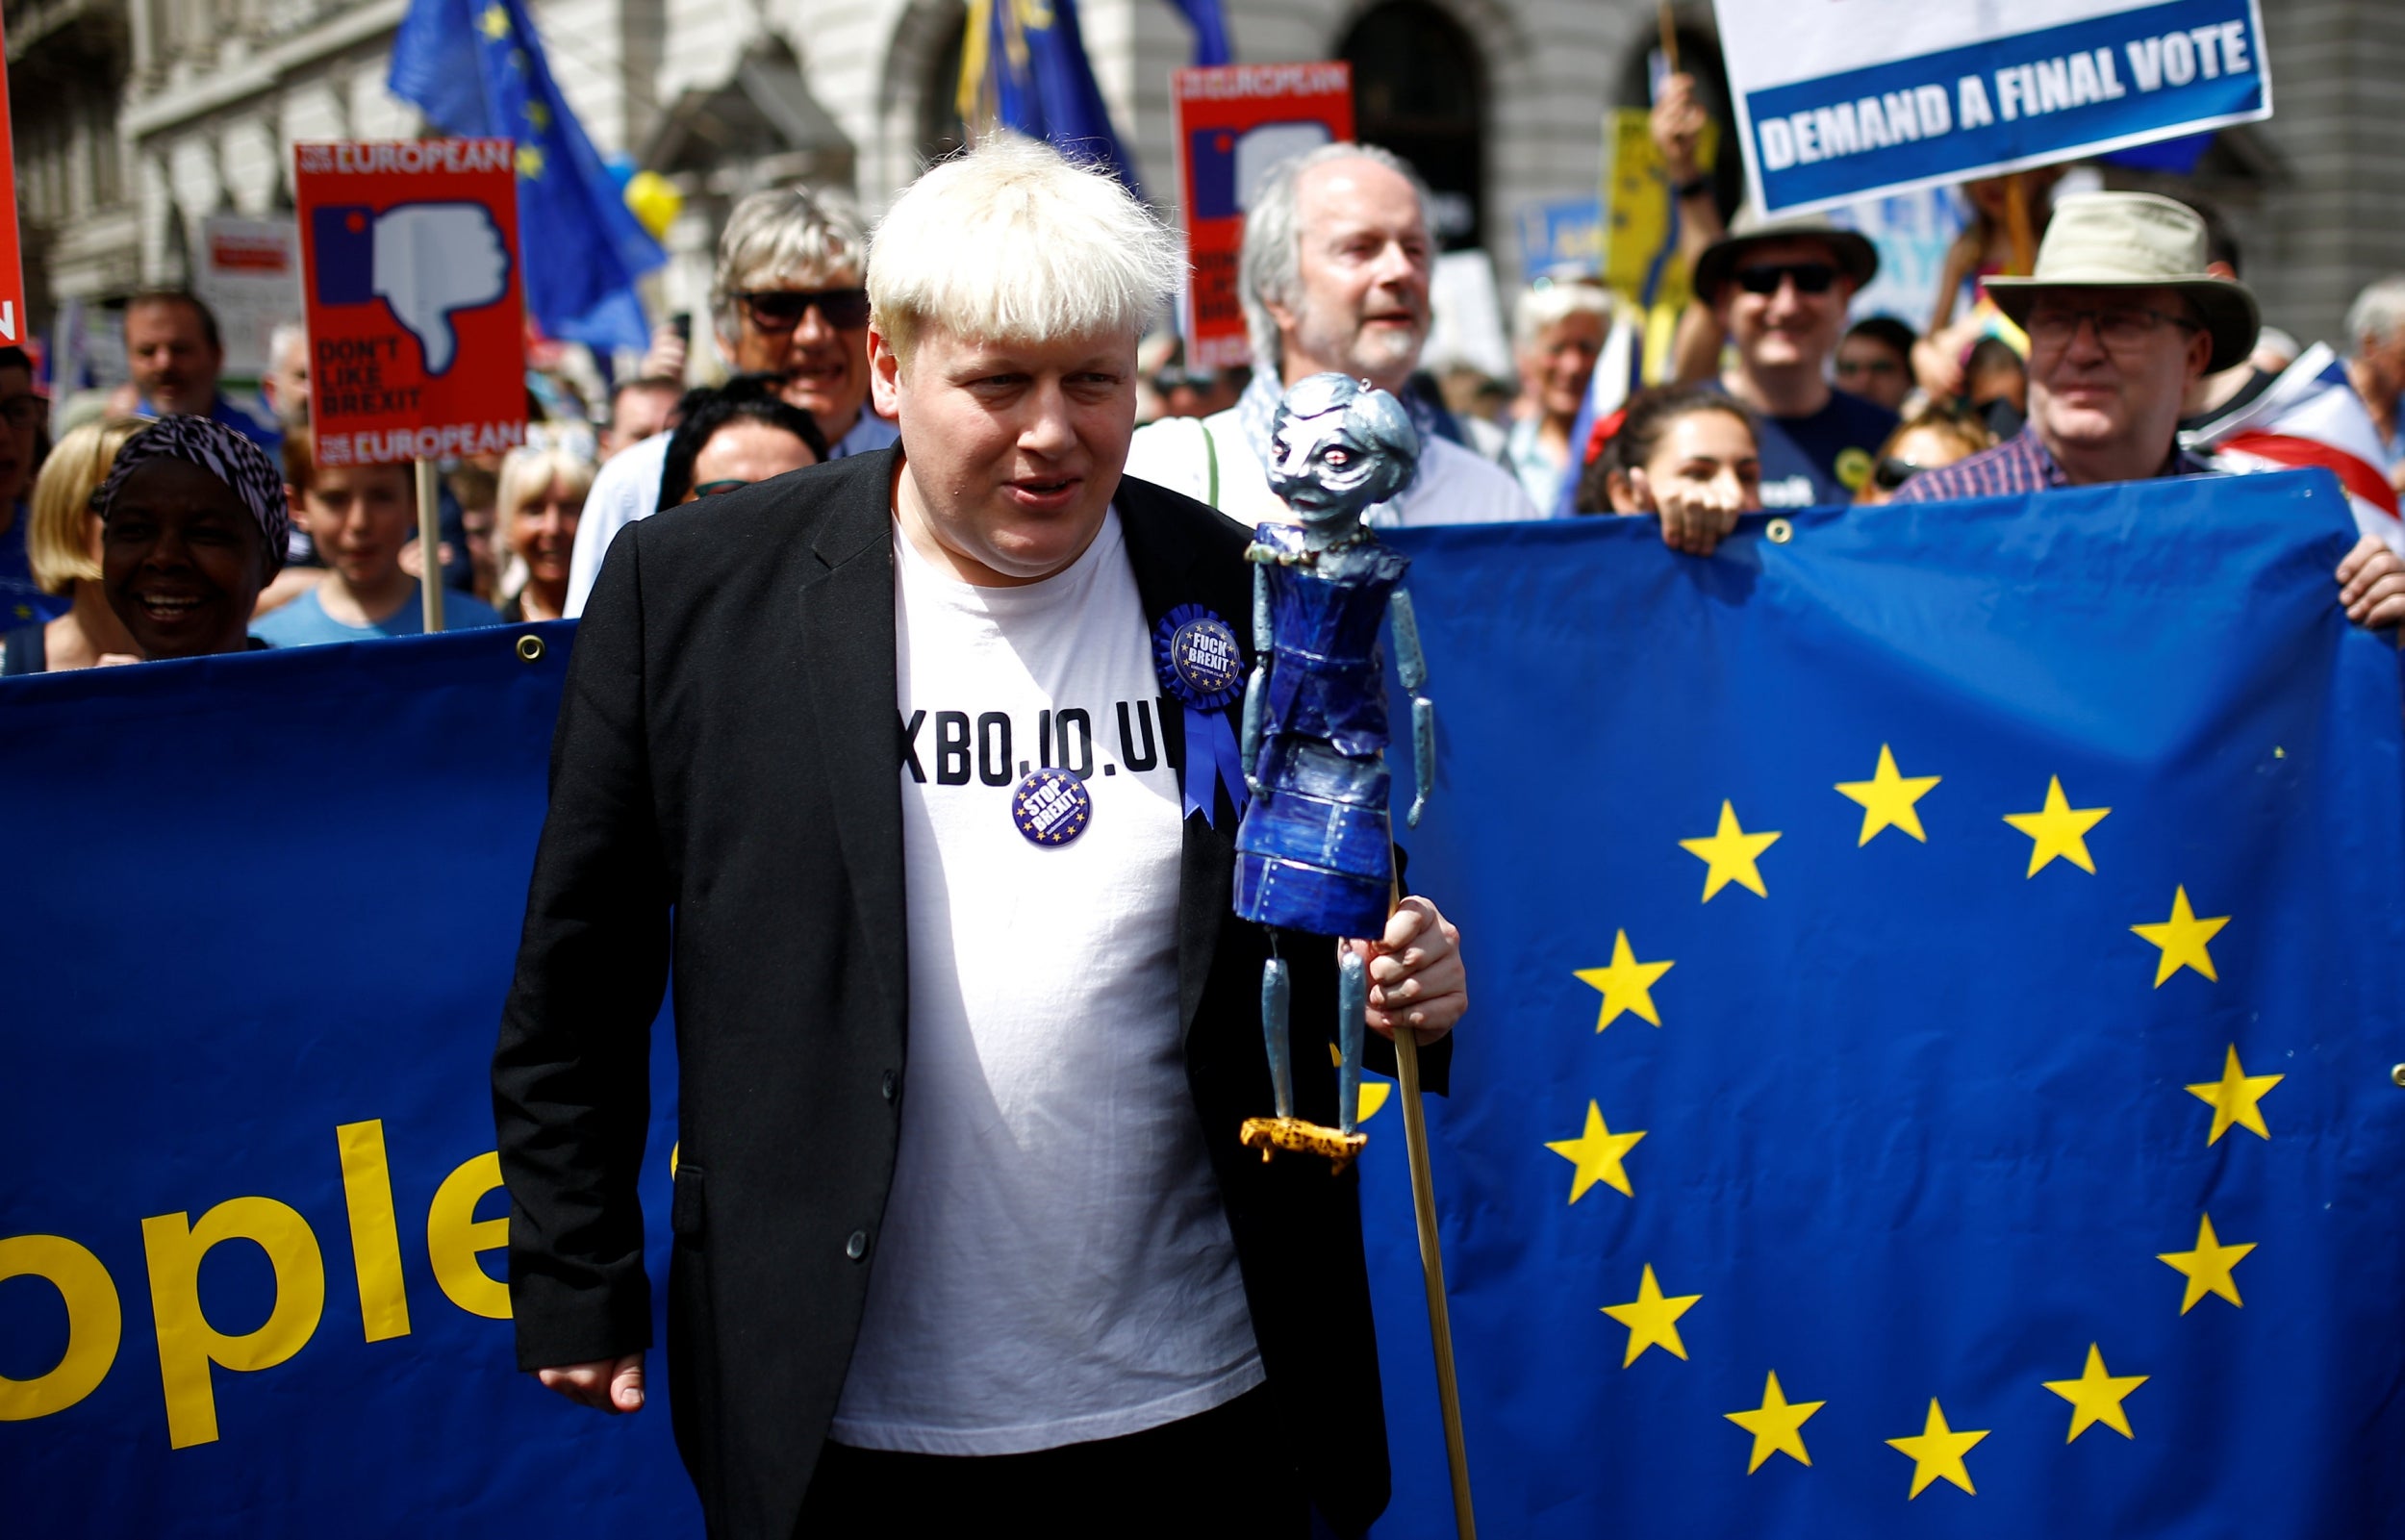 A lookalike of Boris Johnson, who recently called for a 'full British Brexit'